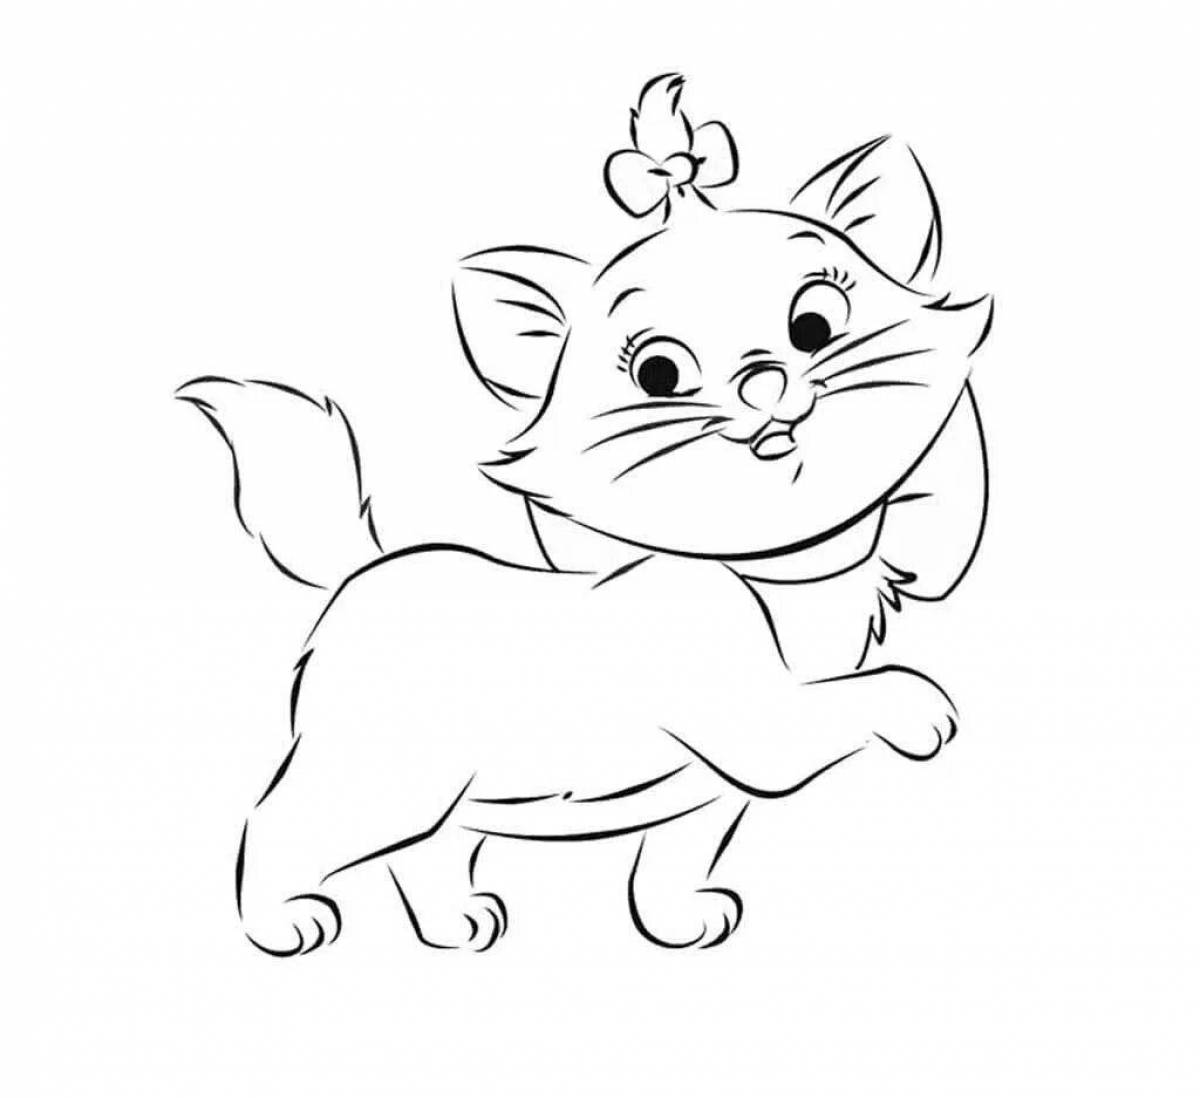 Tiny kitten coloring pages